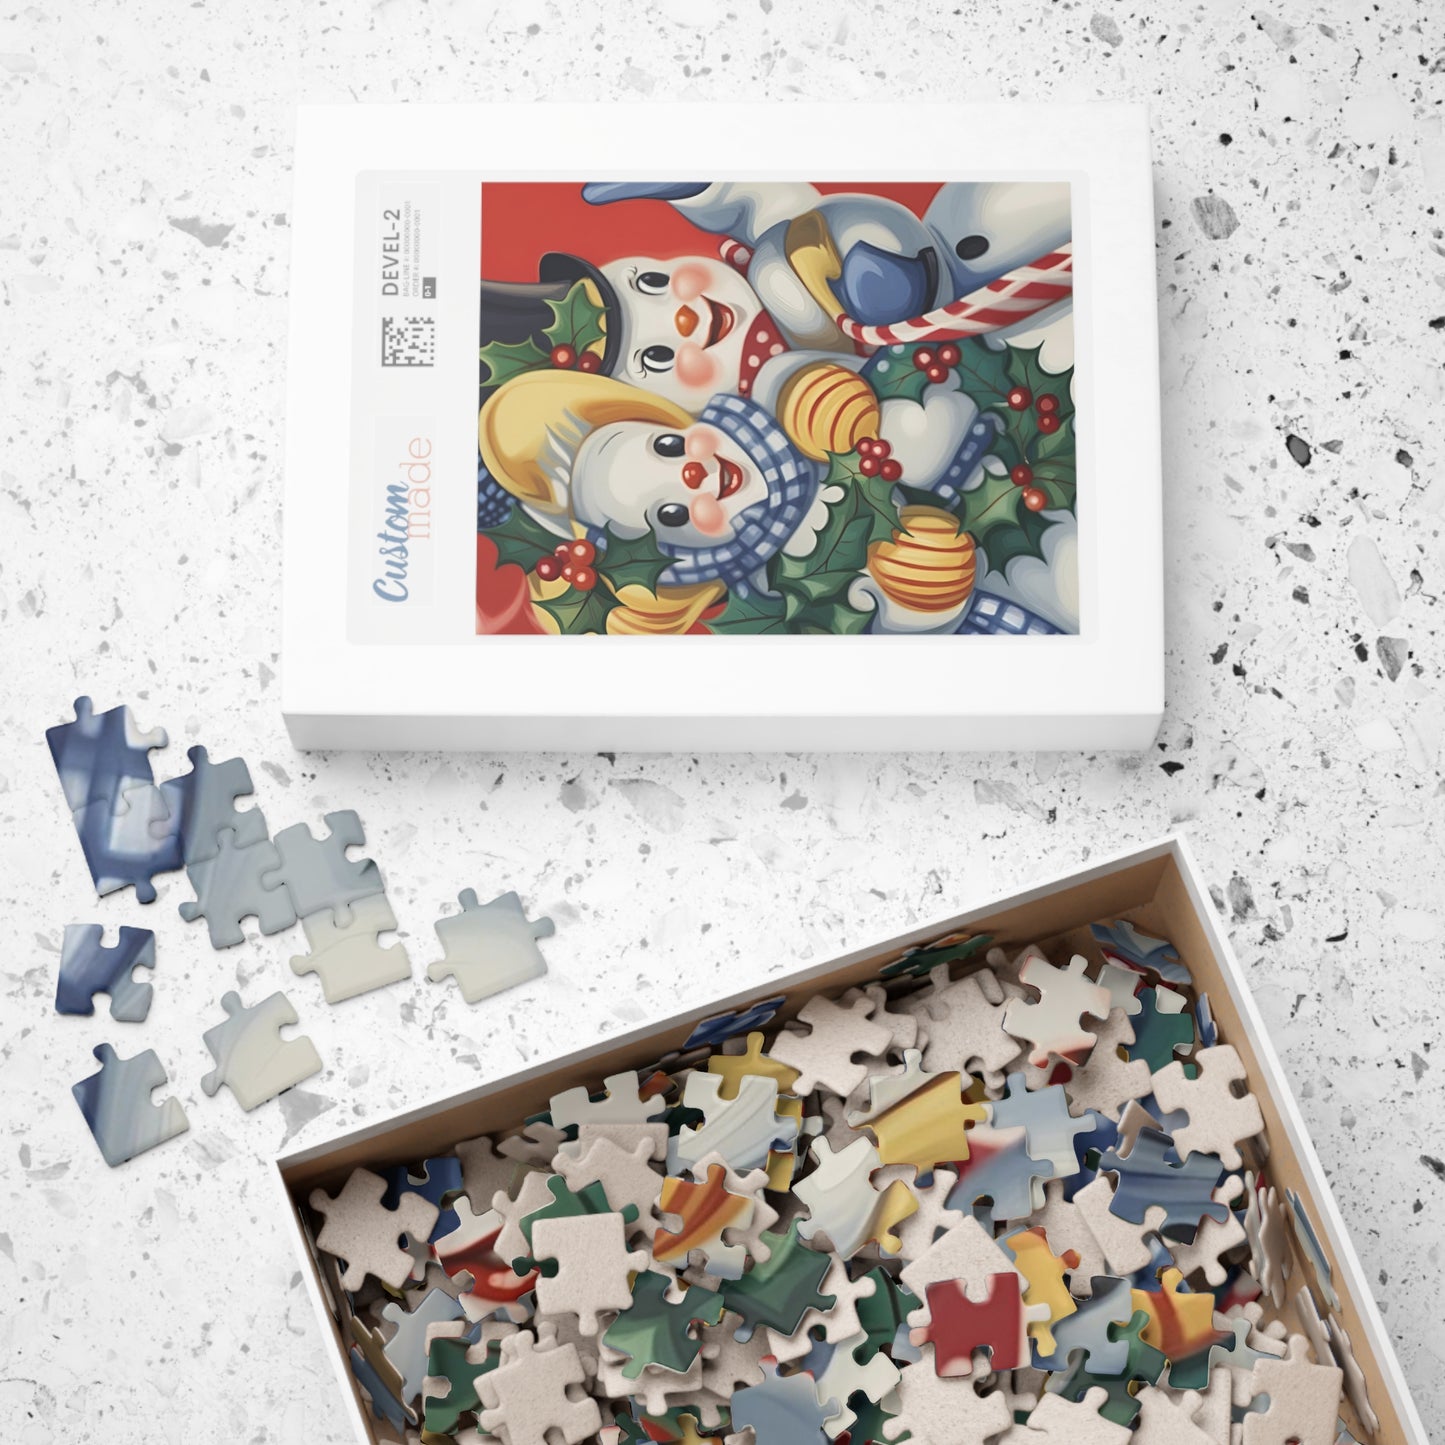 Mr. and Mrs. Snowman Puzzle (110, 252, 500, 1014-piece)